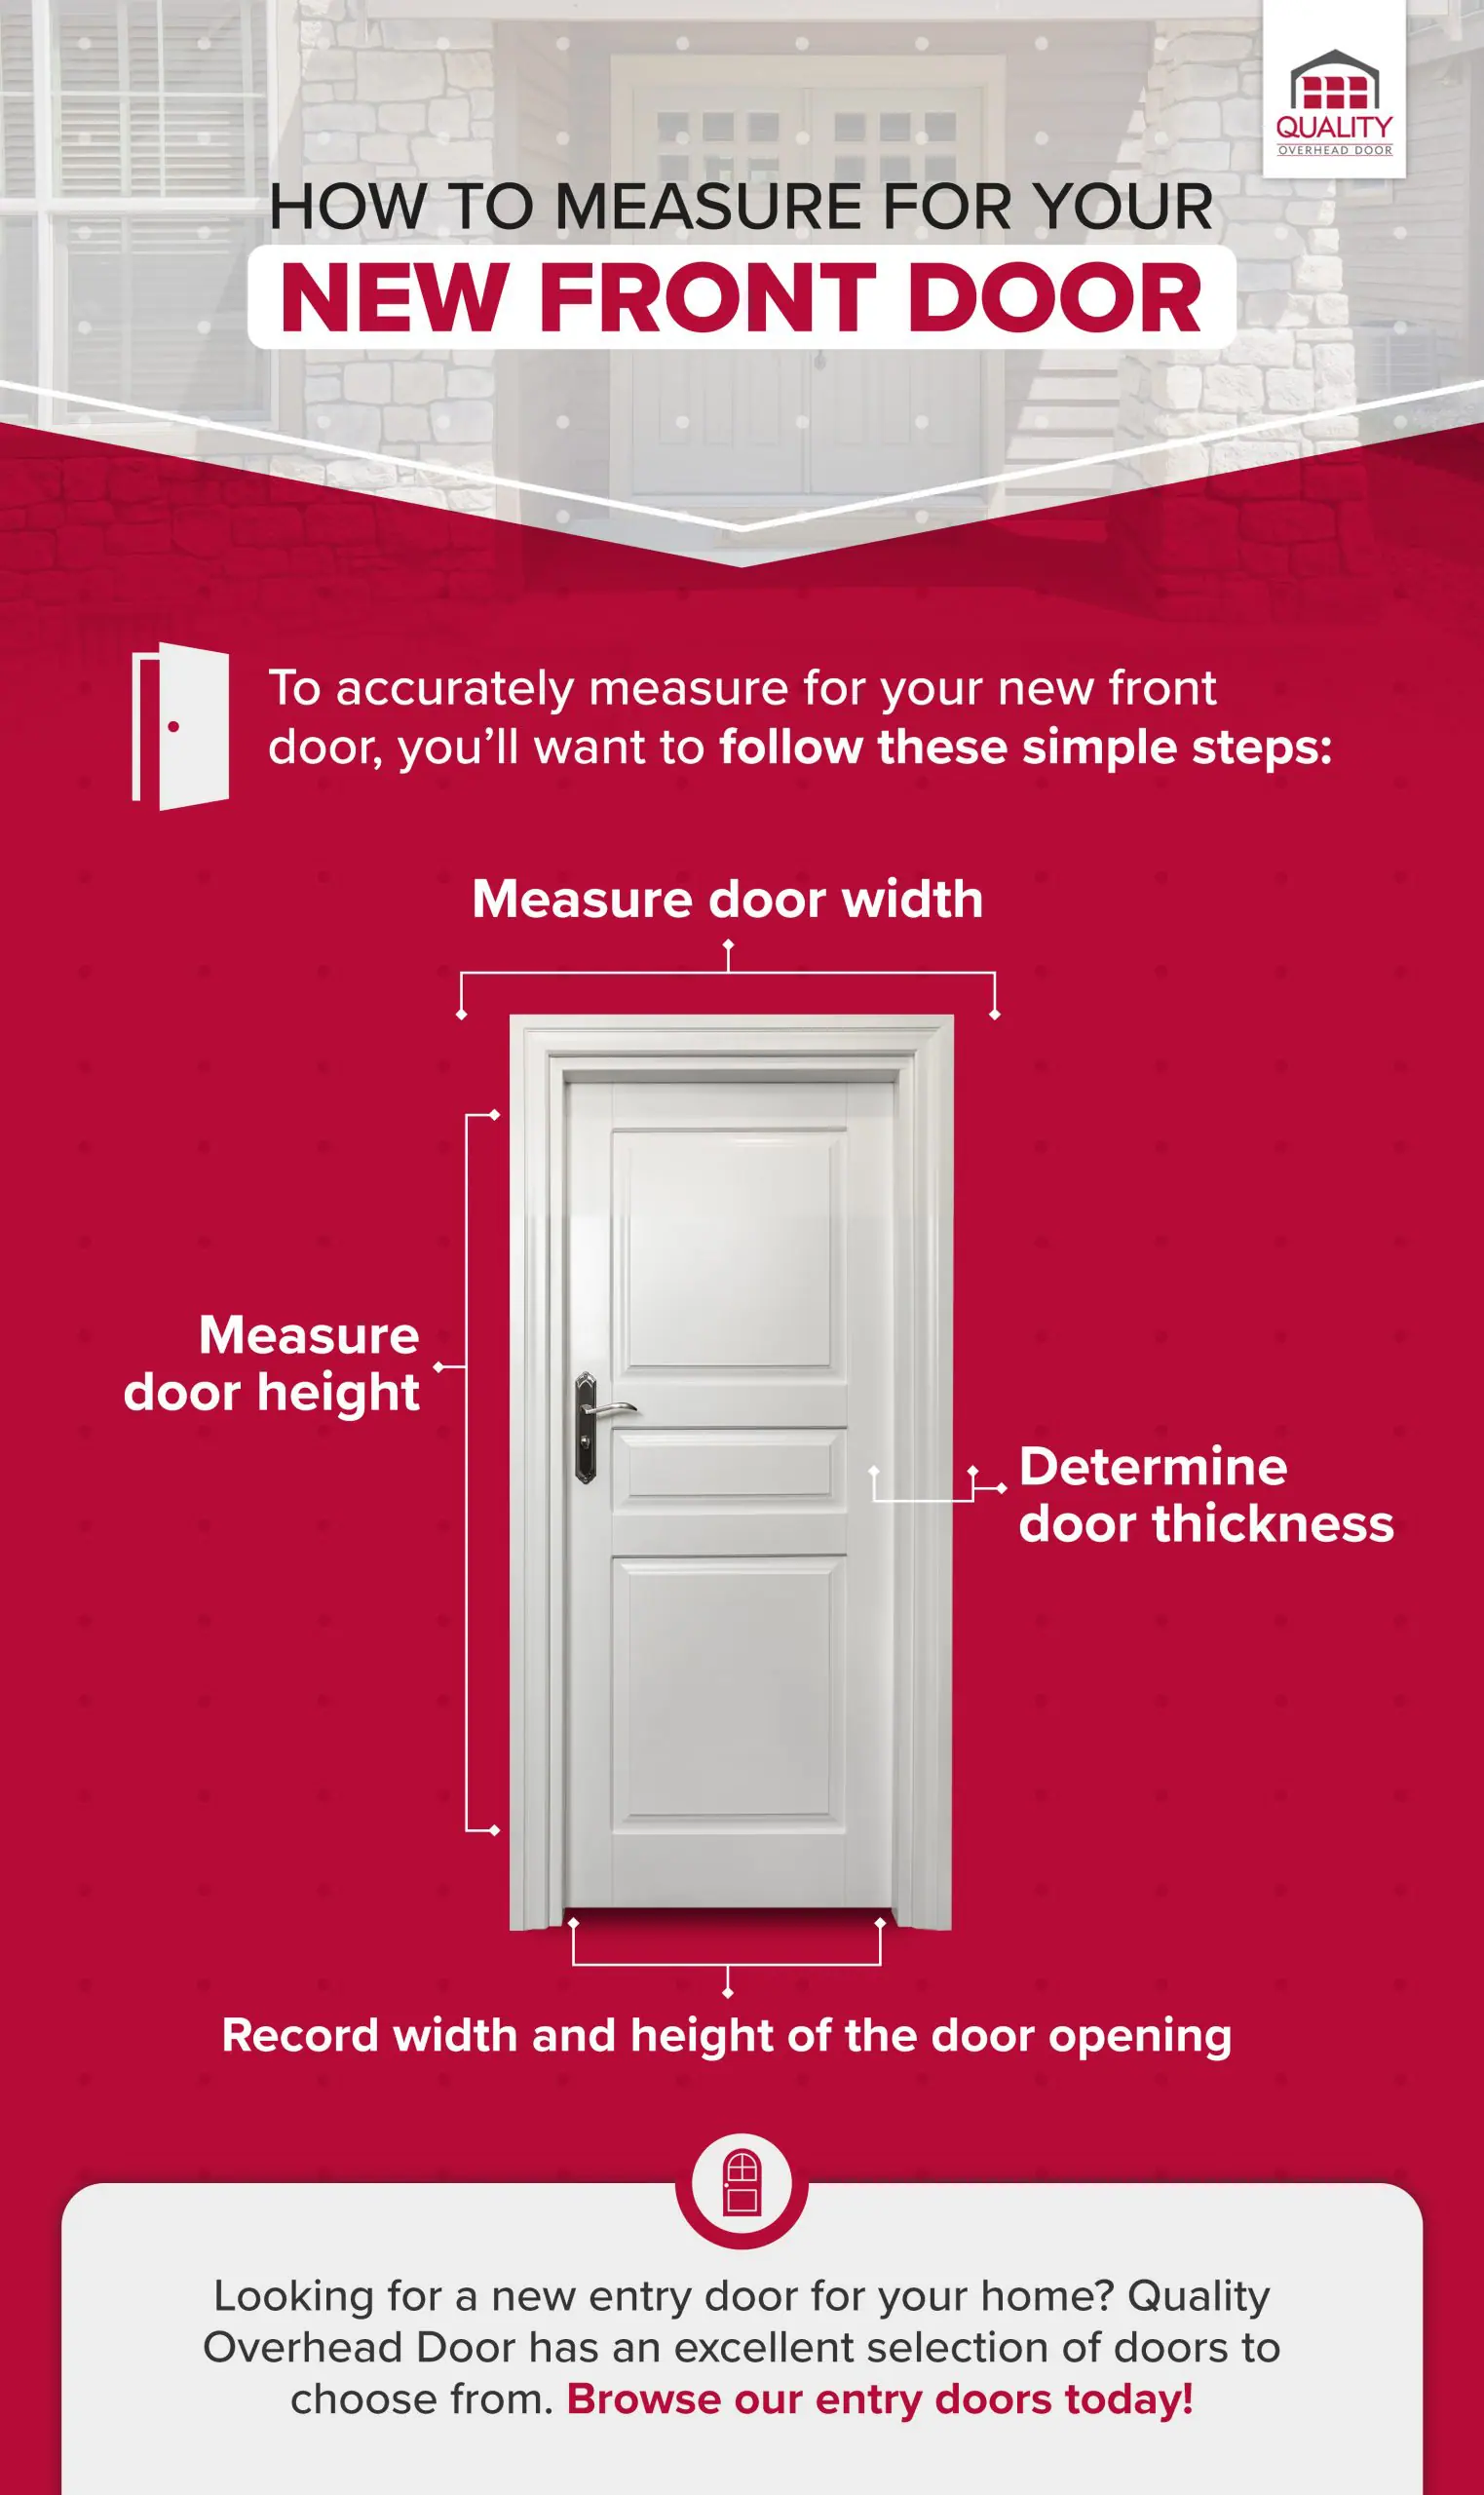 How to measure for your new front door